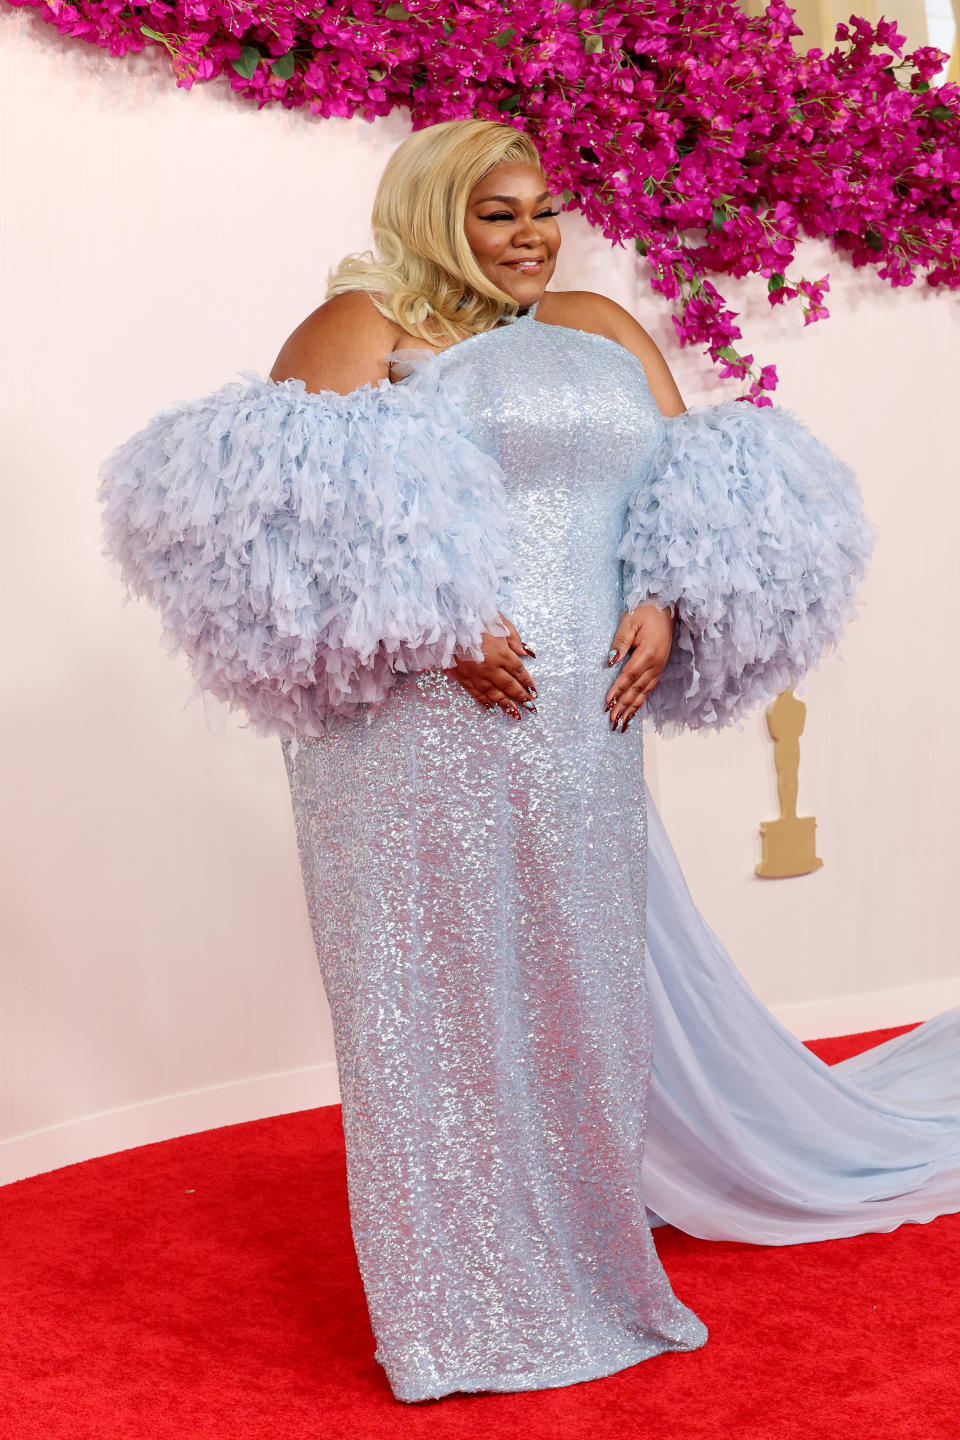 The Holdovers' Da'Vine Joy Randolph looked beautiful in her pale blue gown. Photo: Getty